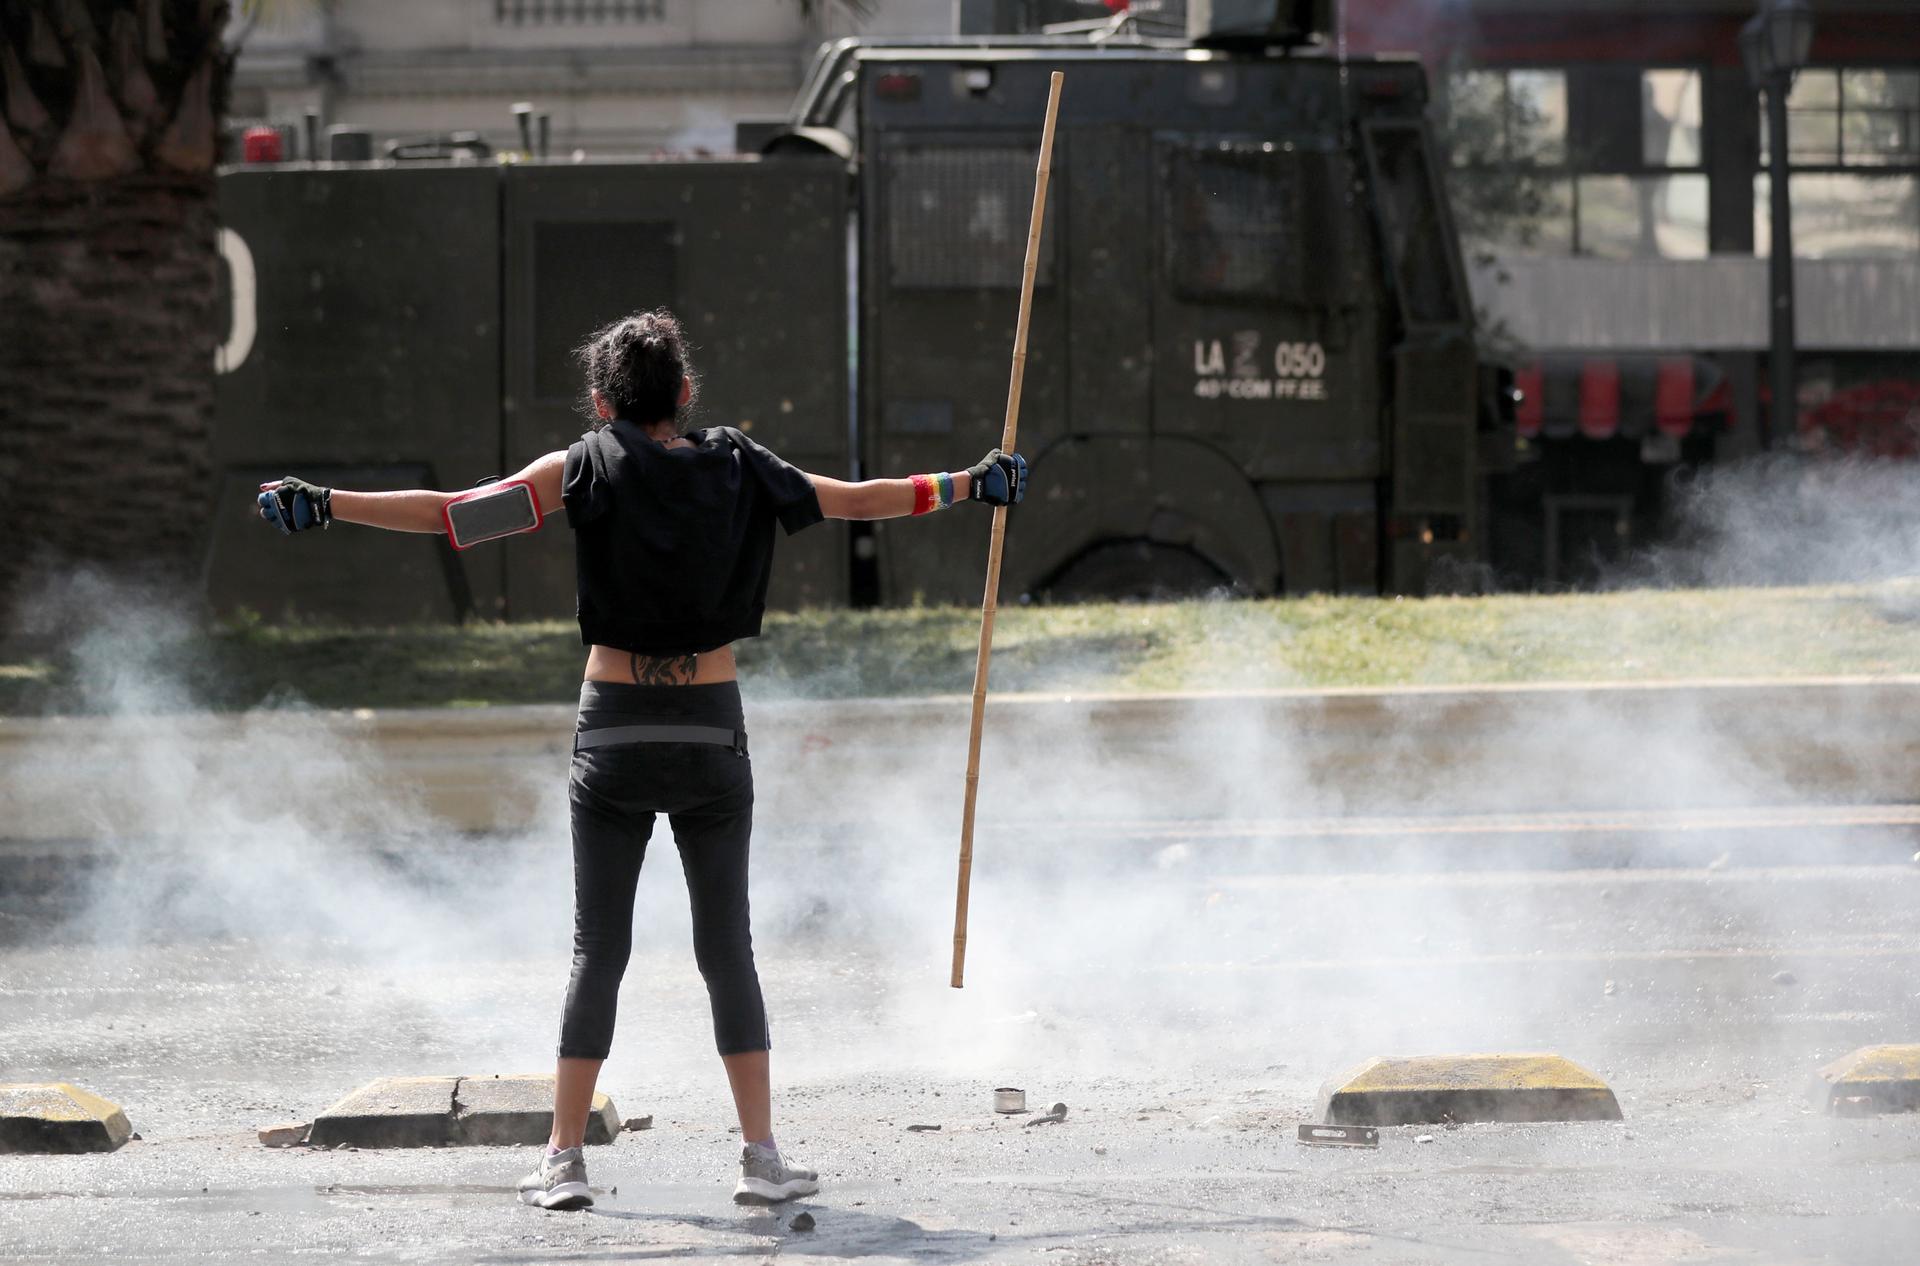 A woman is shown stands with her arms out, holding a stick, with smoke around her and a military truck in the distance.